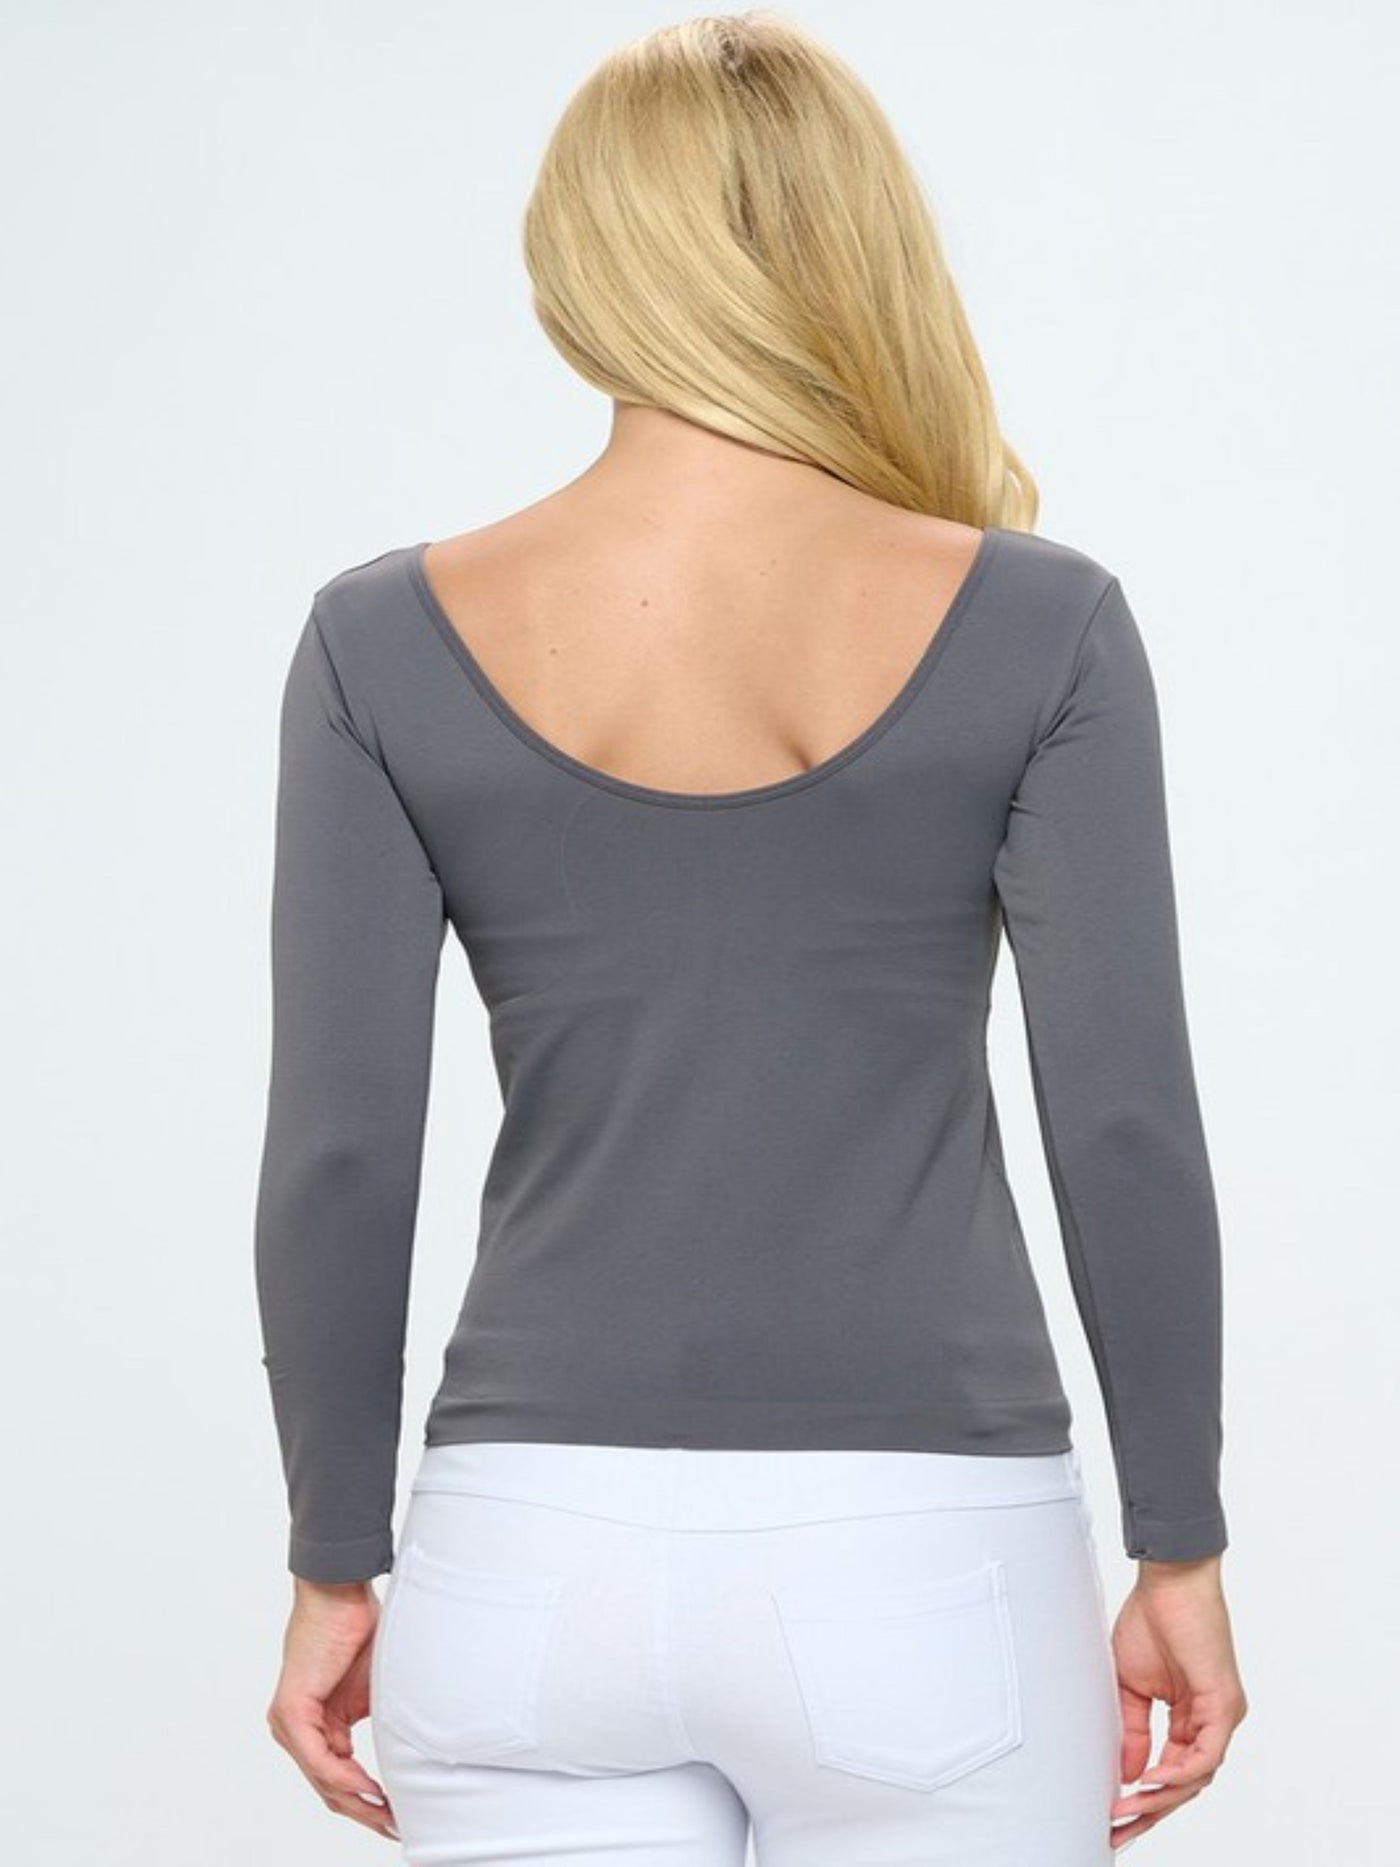 It’s all about the Basics Seamless Reversible V-Neck Long Sleeve Top